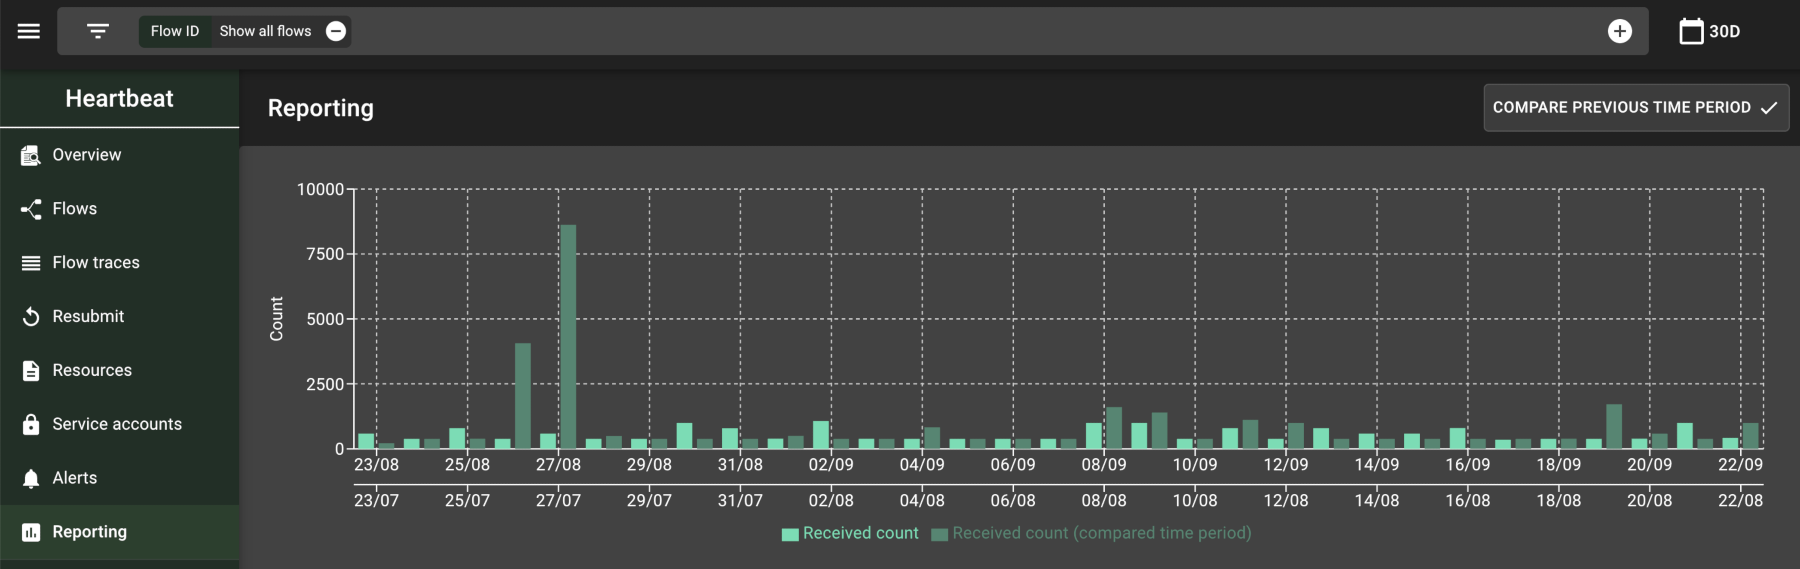 The reporting page displays a bar graph of the number of messages received over the past month.